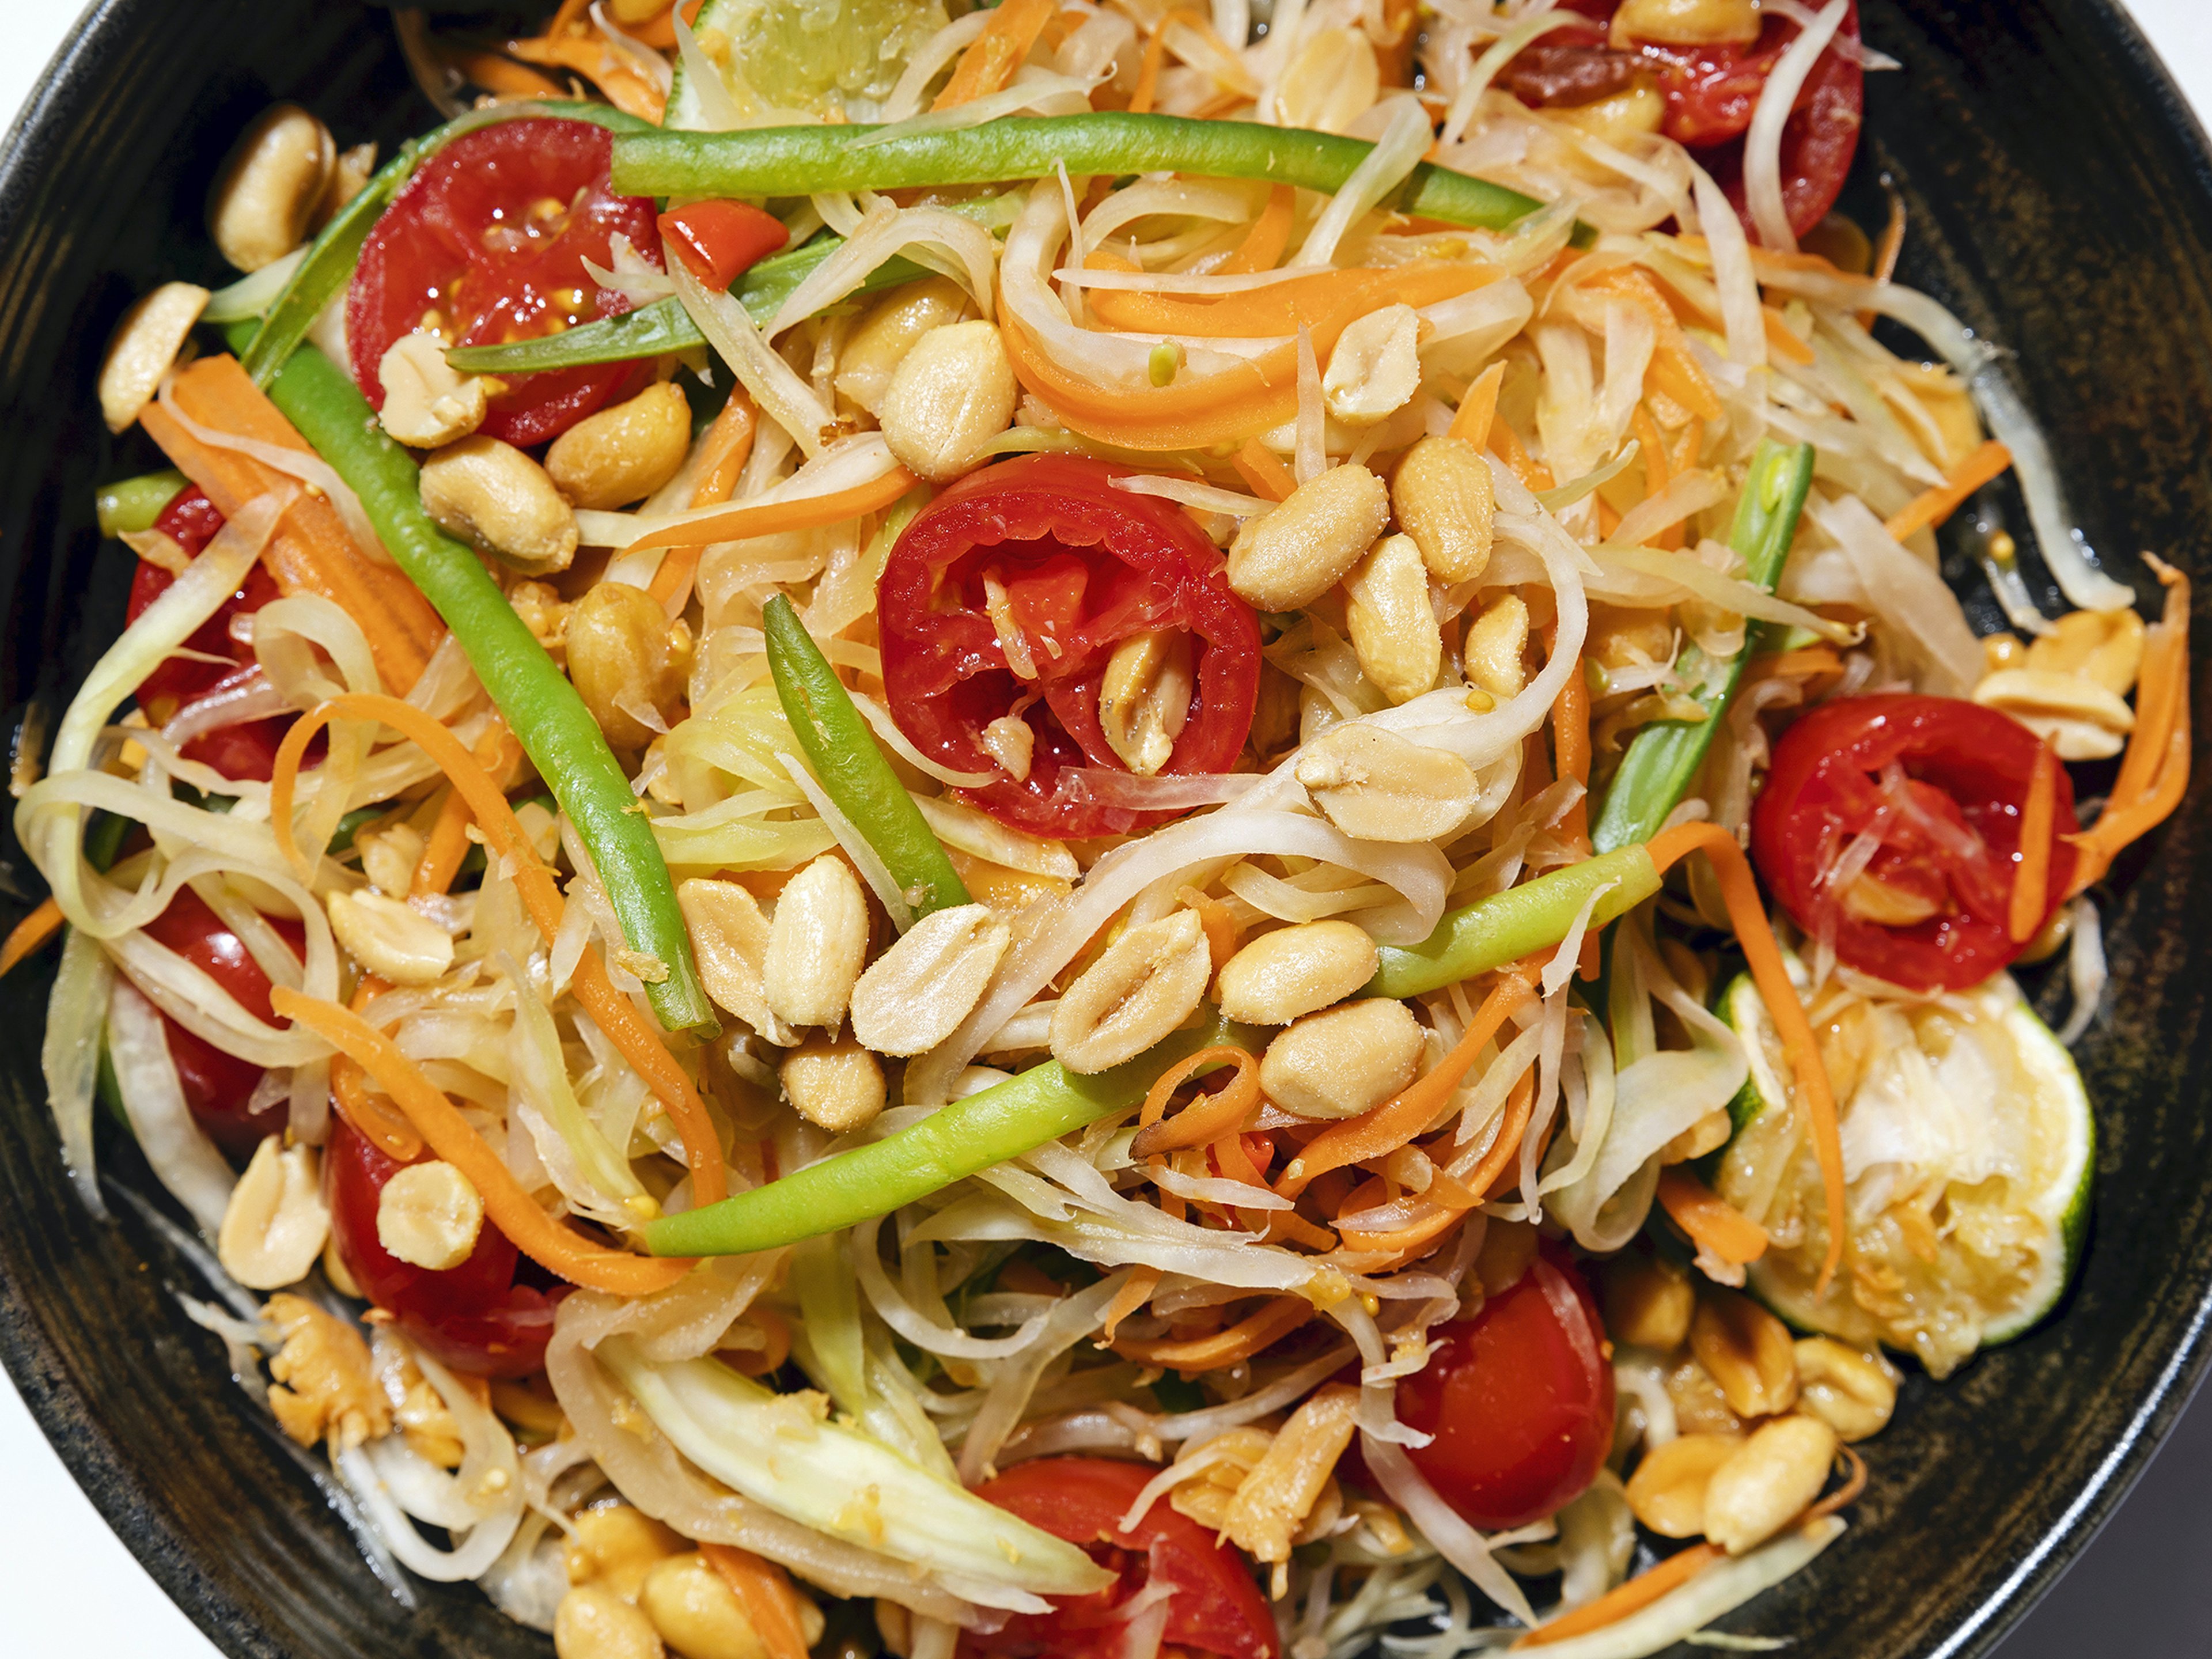 Som Tam is Possibly the World’s Most Addictive Salad